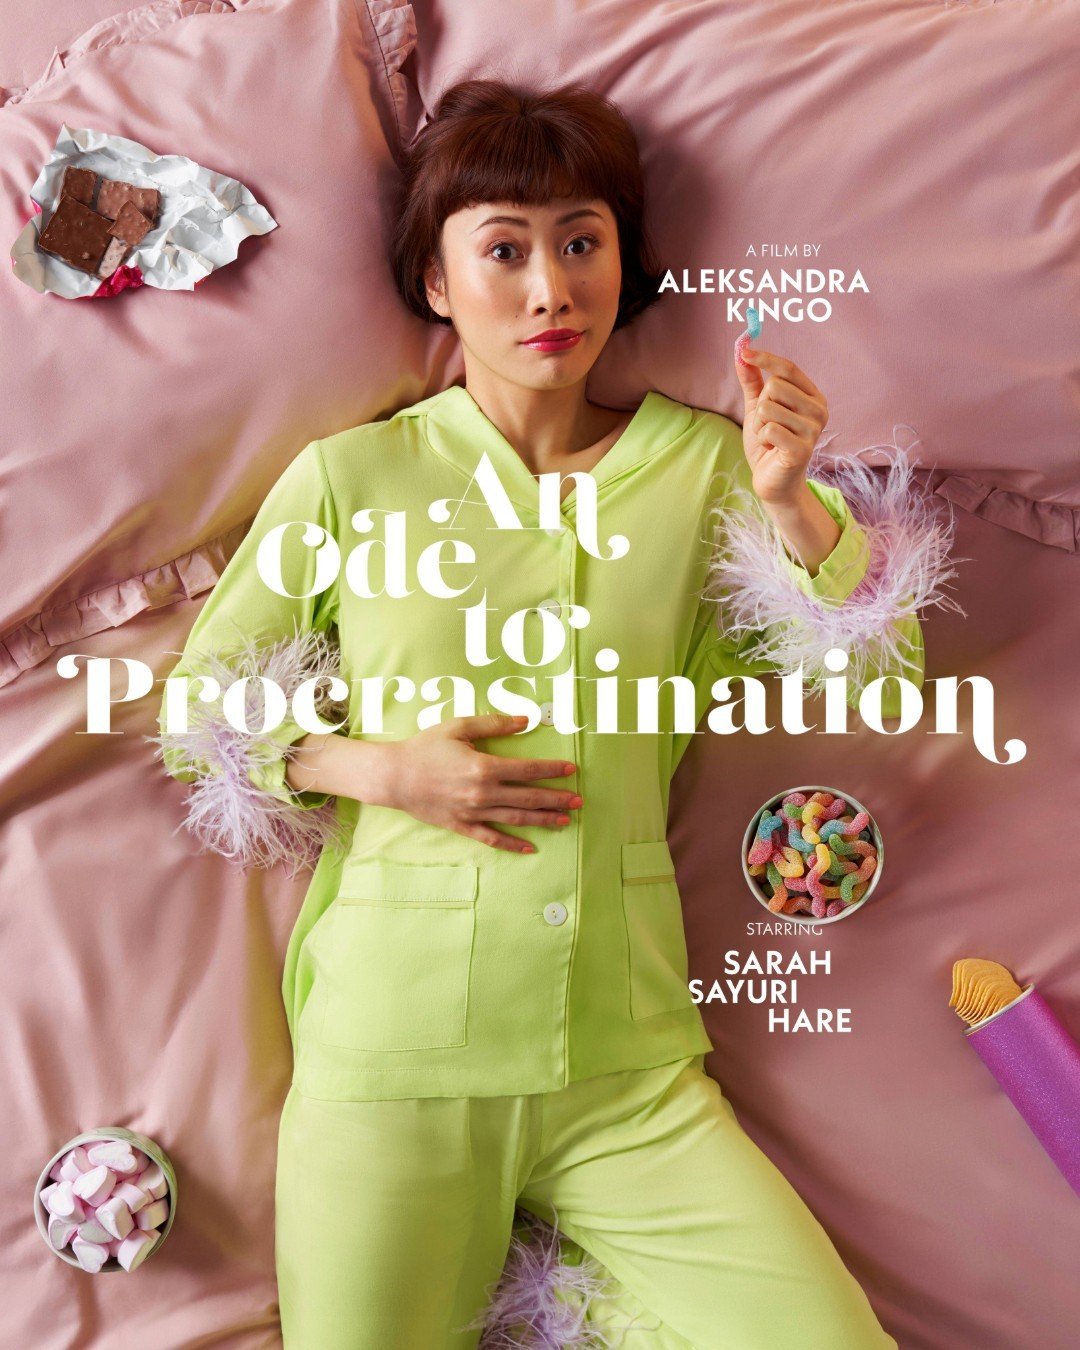 More than 20 international film festival selections and 7 wins, including @Aasffestival, @barcelonafashionfilmfestival and @BerlinCommercial⁠
⁠
An Ode to Procrastination, directed by the talented @aleksandrakingo is releasing on @directorsnotes on Ap